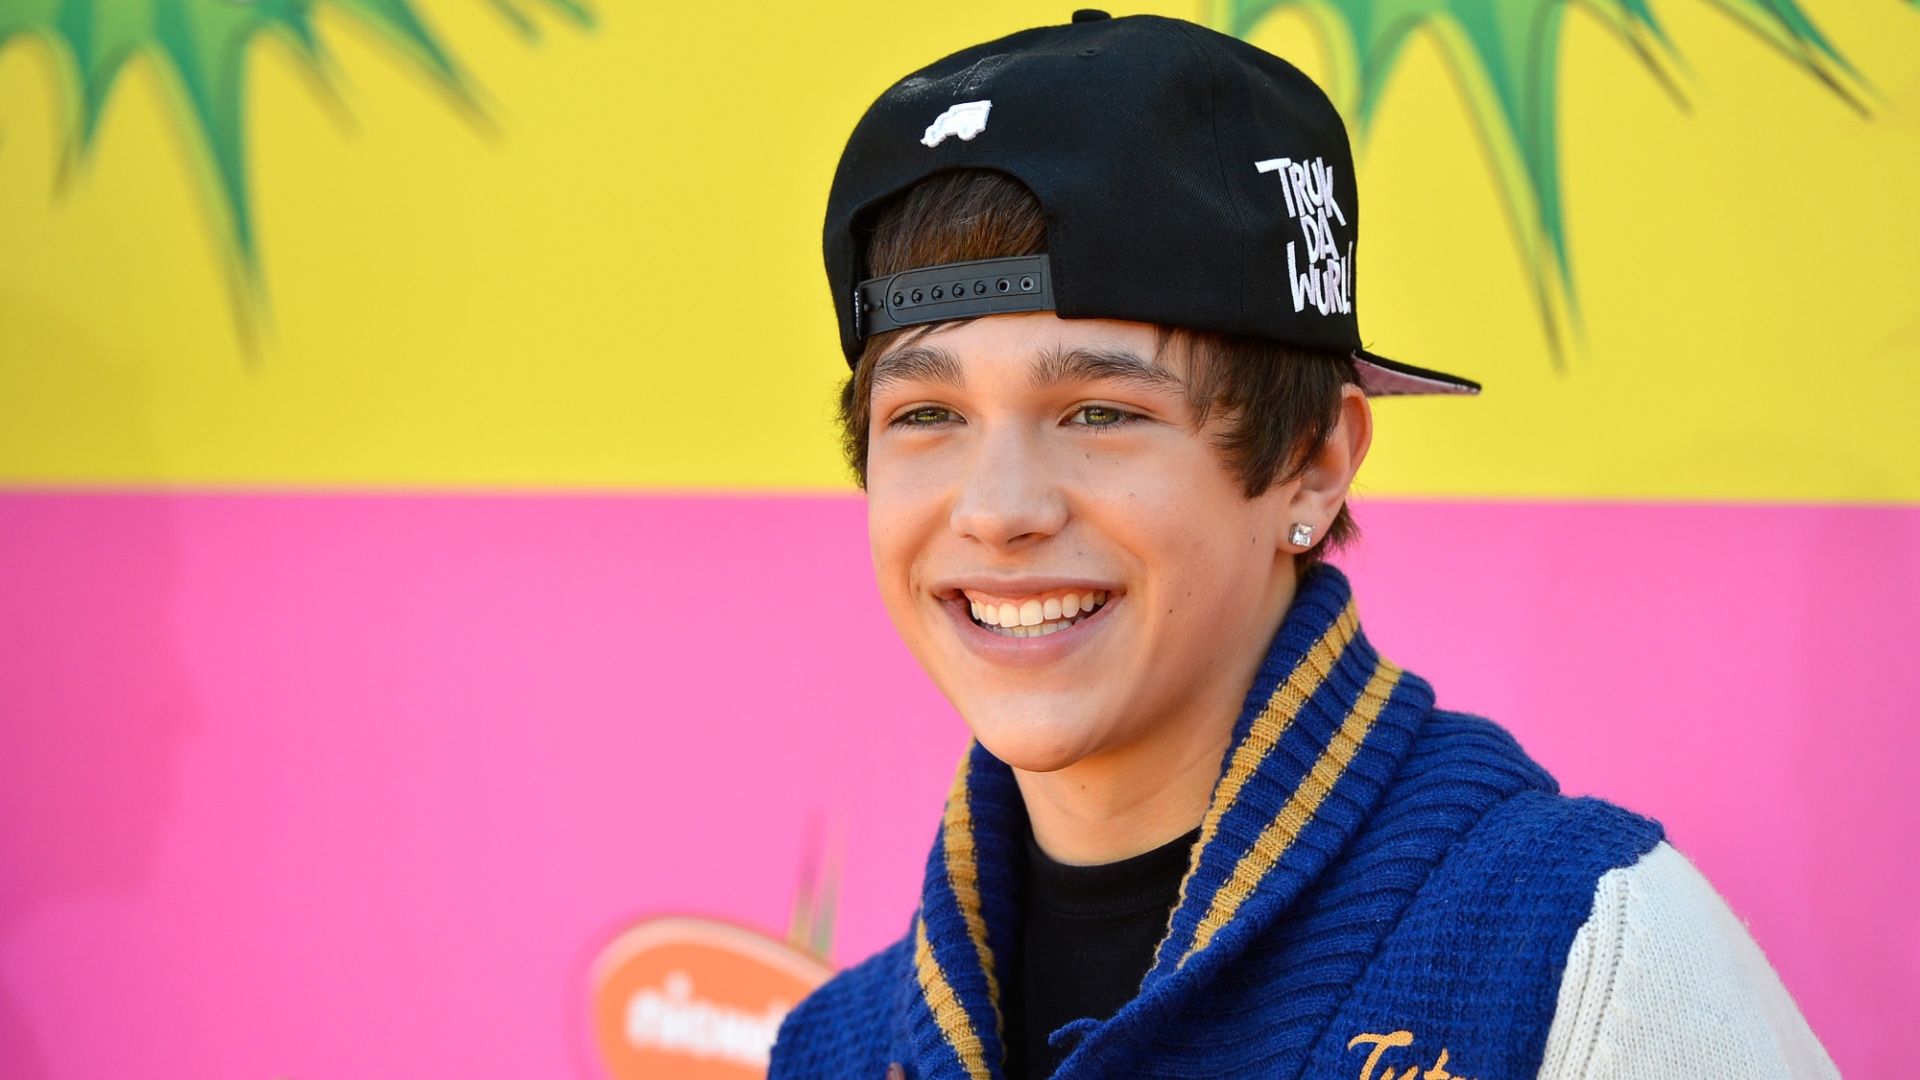 Say You Are Just A Friend av Austin Mahone